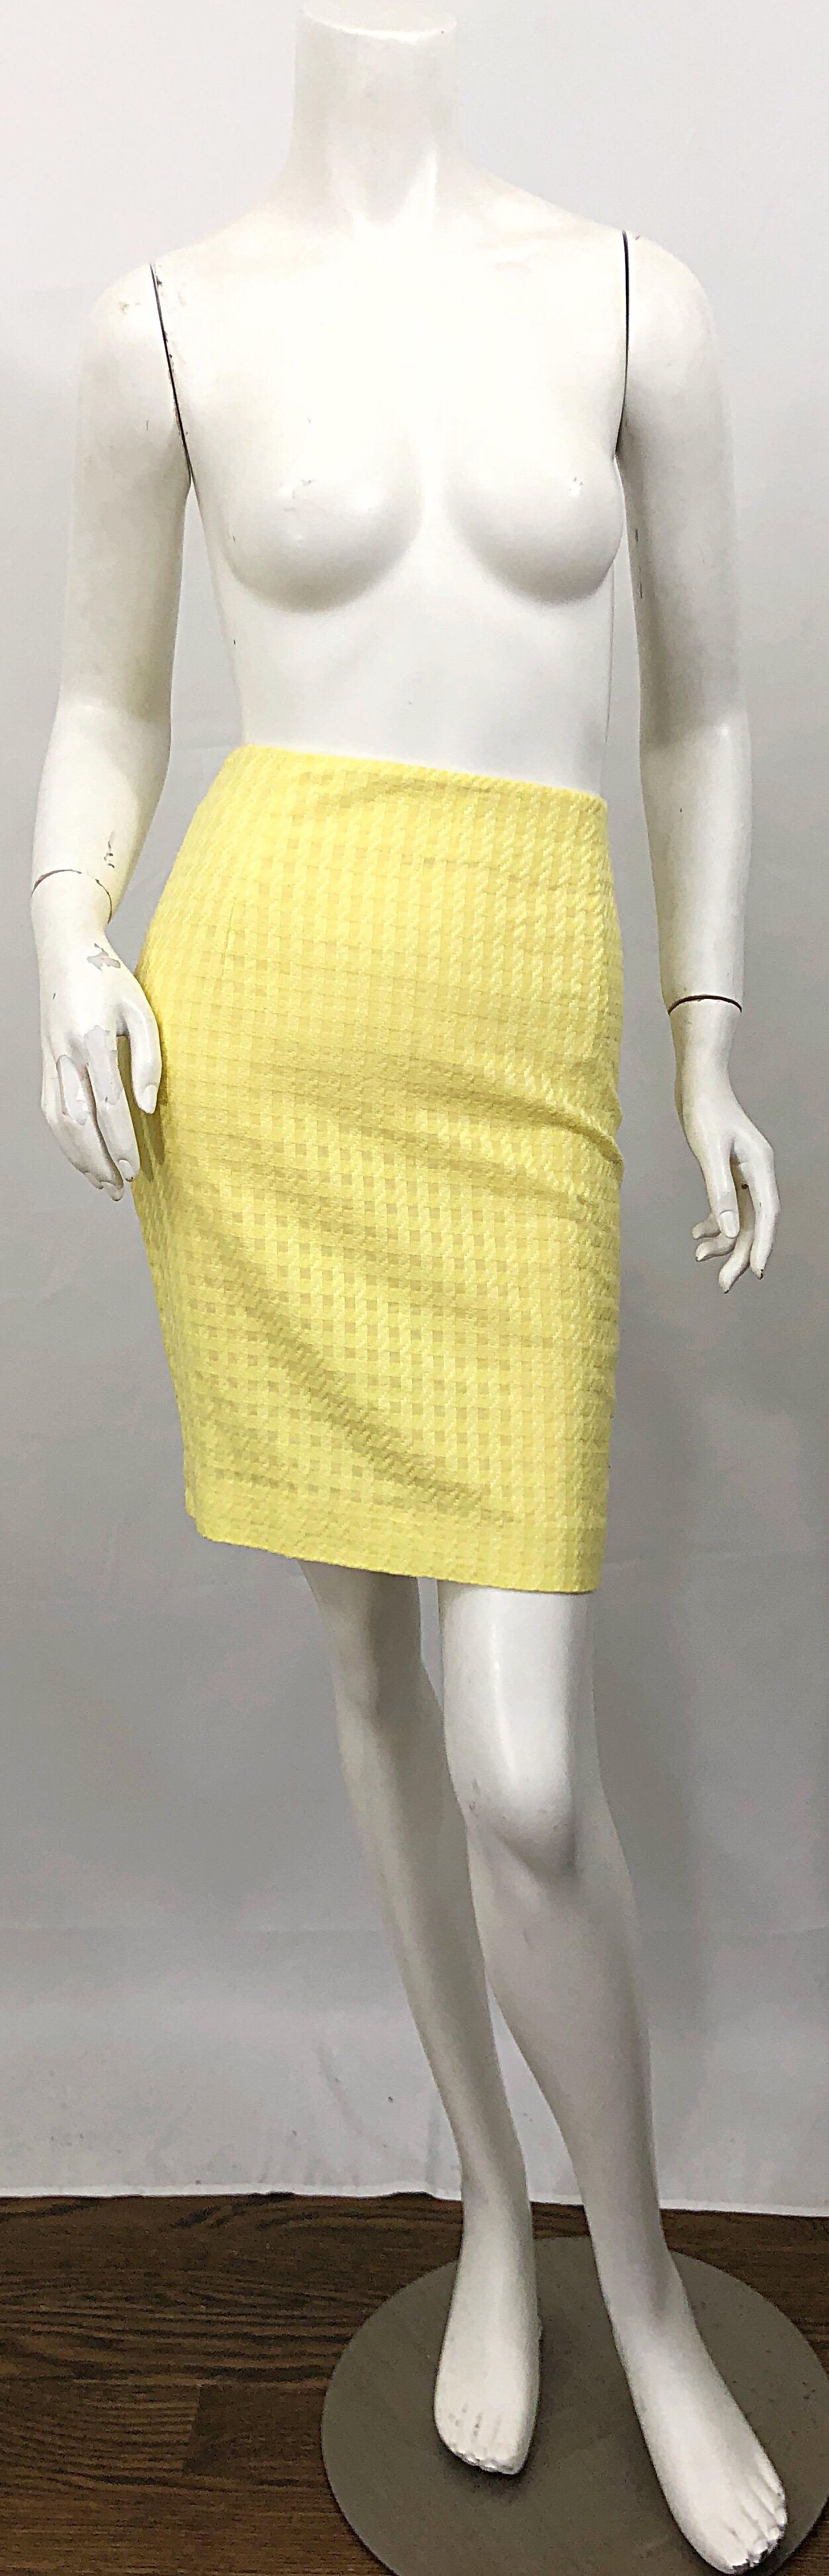 The perfect vintage 90s GIANNI VERSACE high waisted canary yellow cotton mini pencil skirt! Features a slightly textured check print in two similar shades of canary yellow. Vent at center back hem makes walking easier. Hidden zipper up the side with